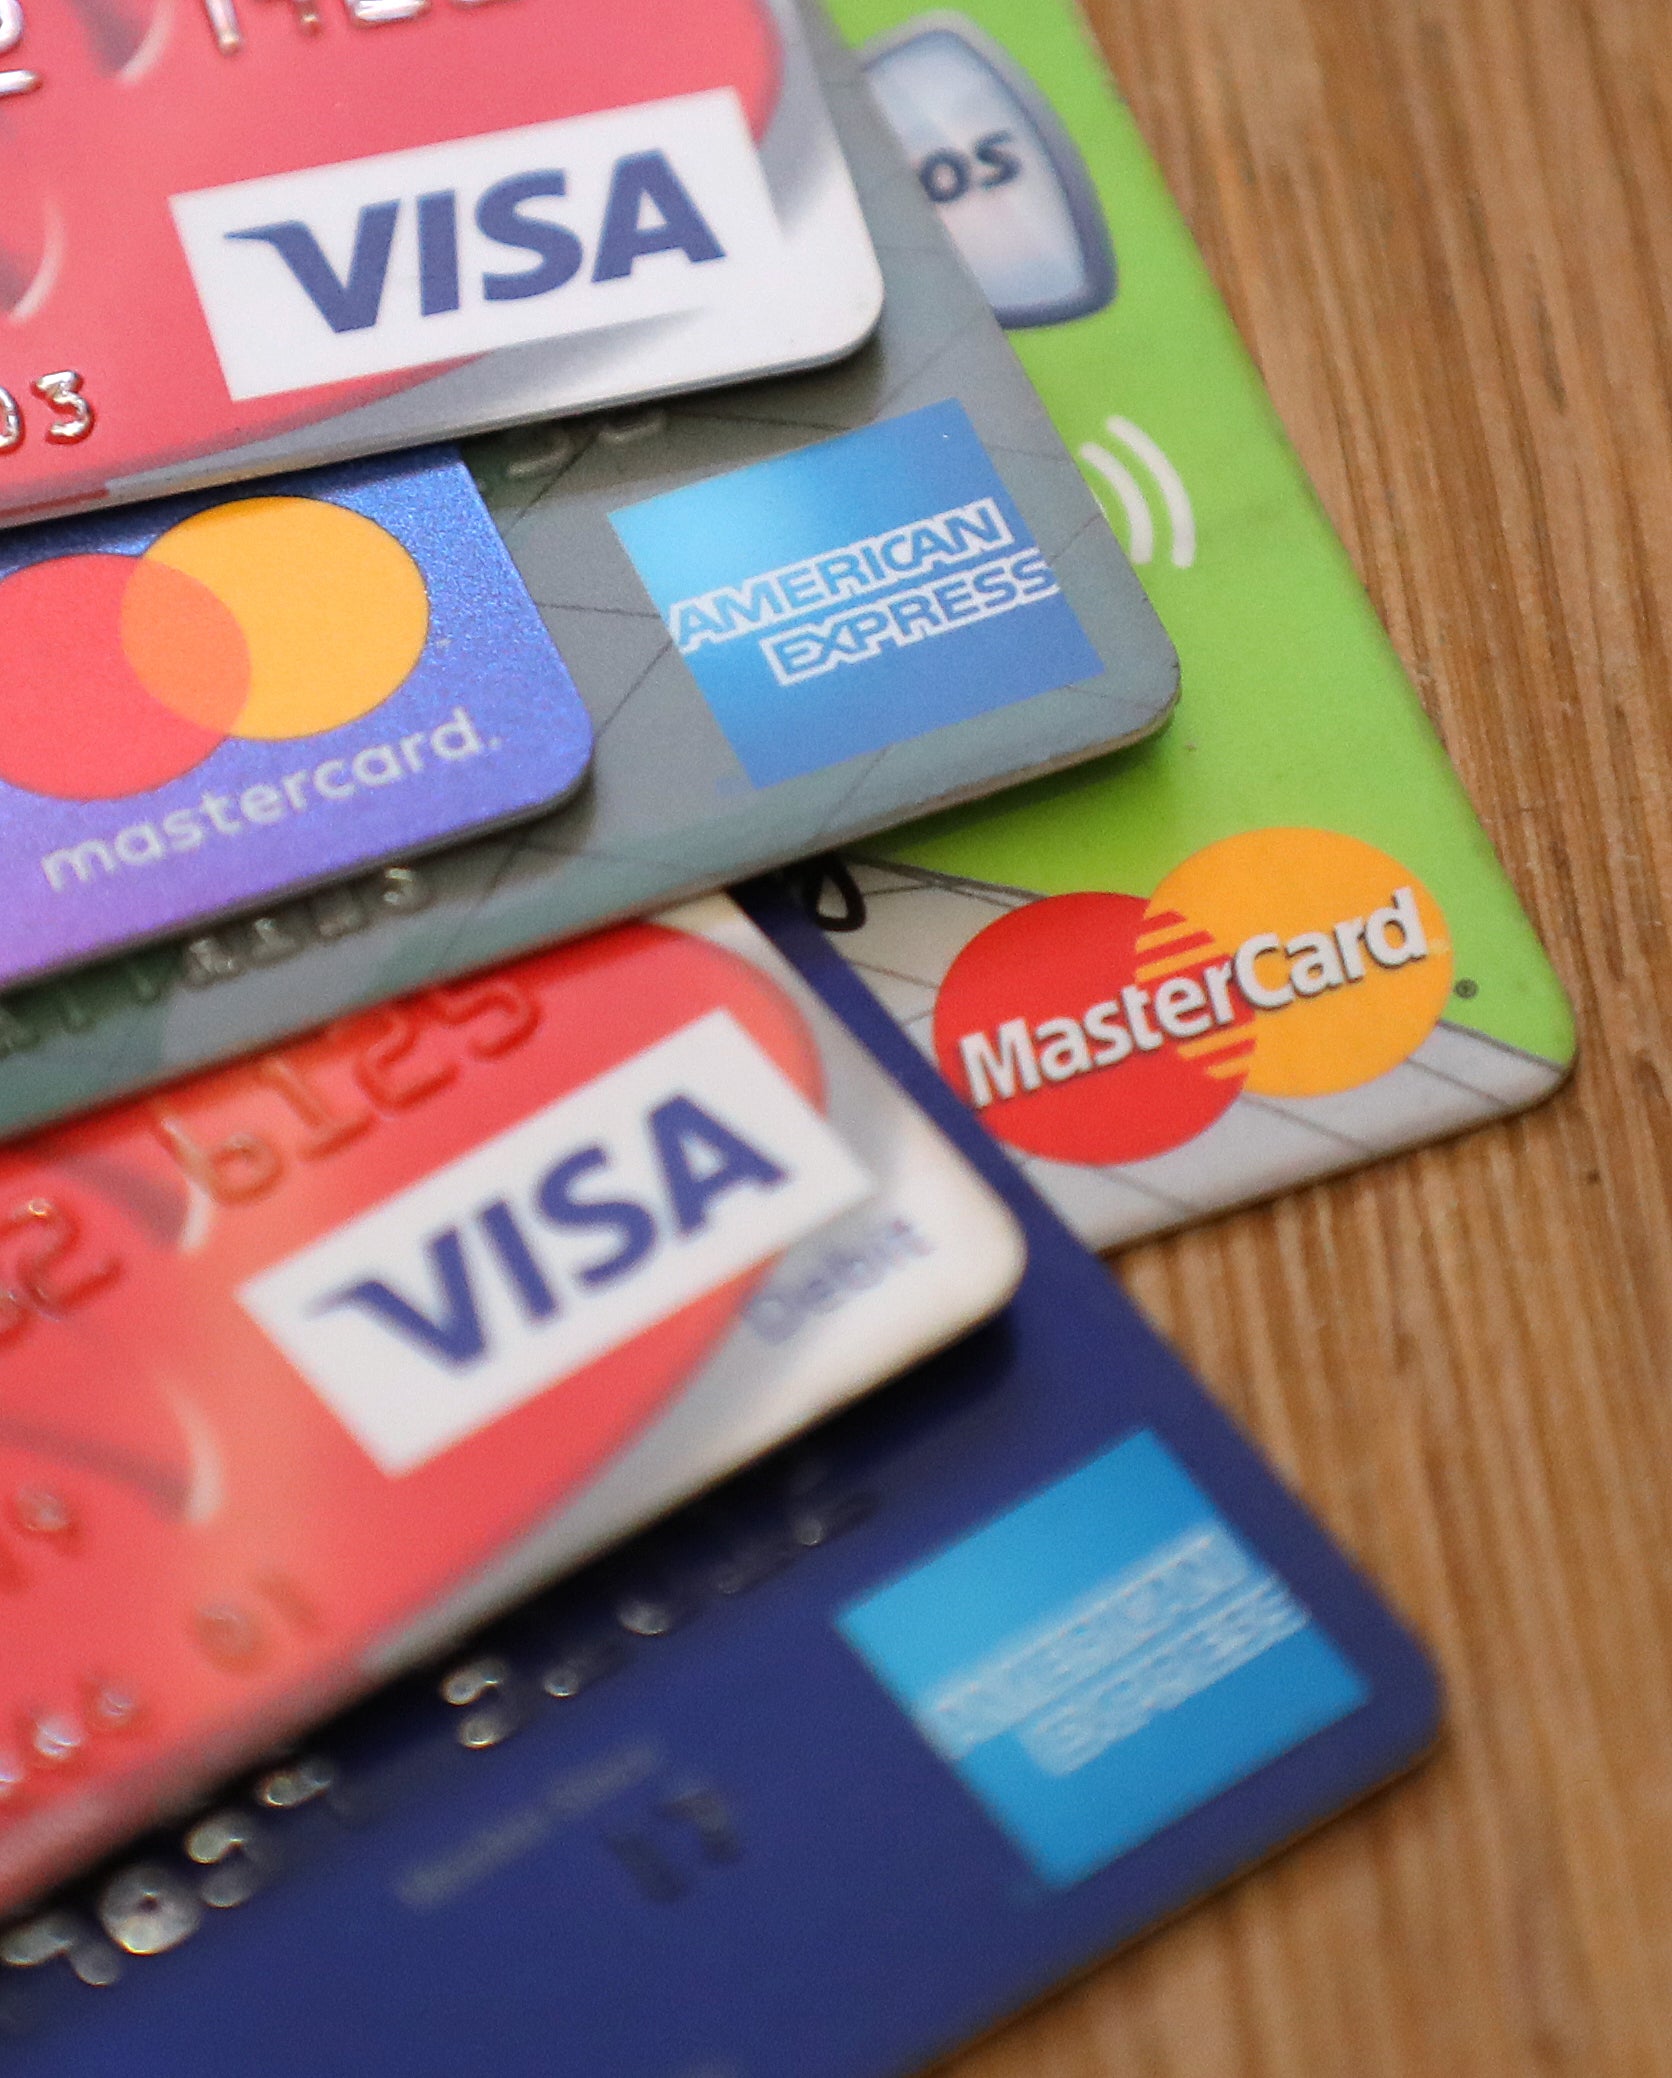 Card payments accounted for more than £4 in every £5 spent in 2020, British Retail Consortium figures show (Andrew Matthews/PA)